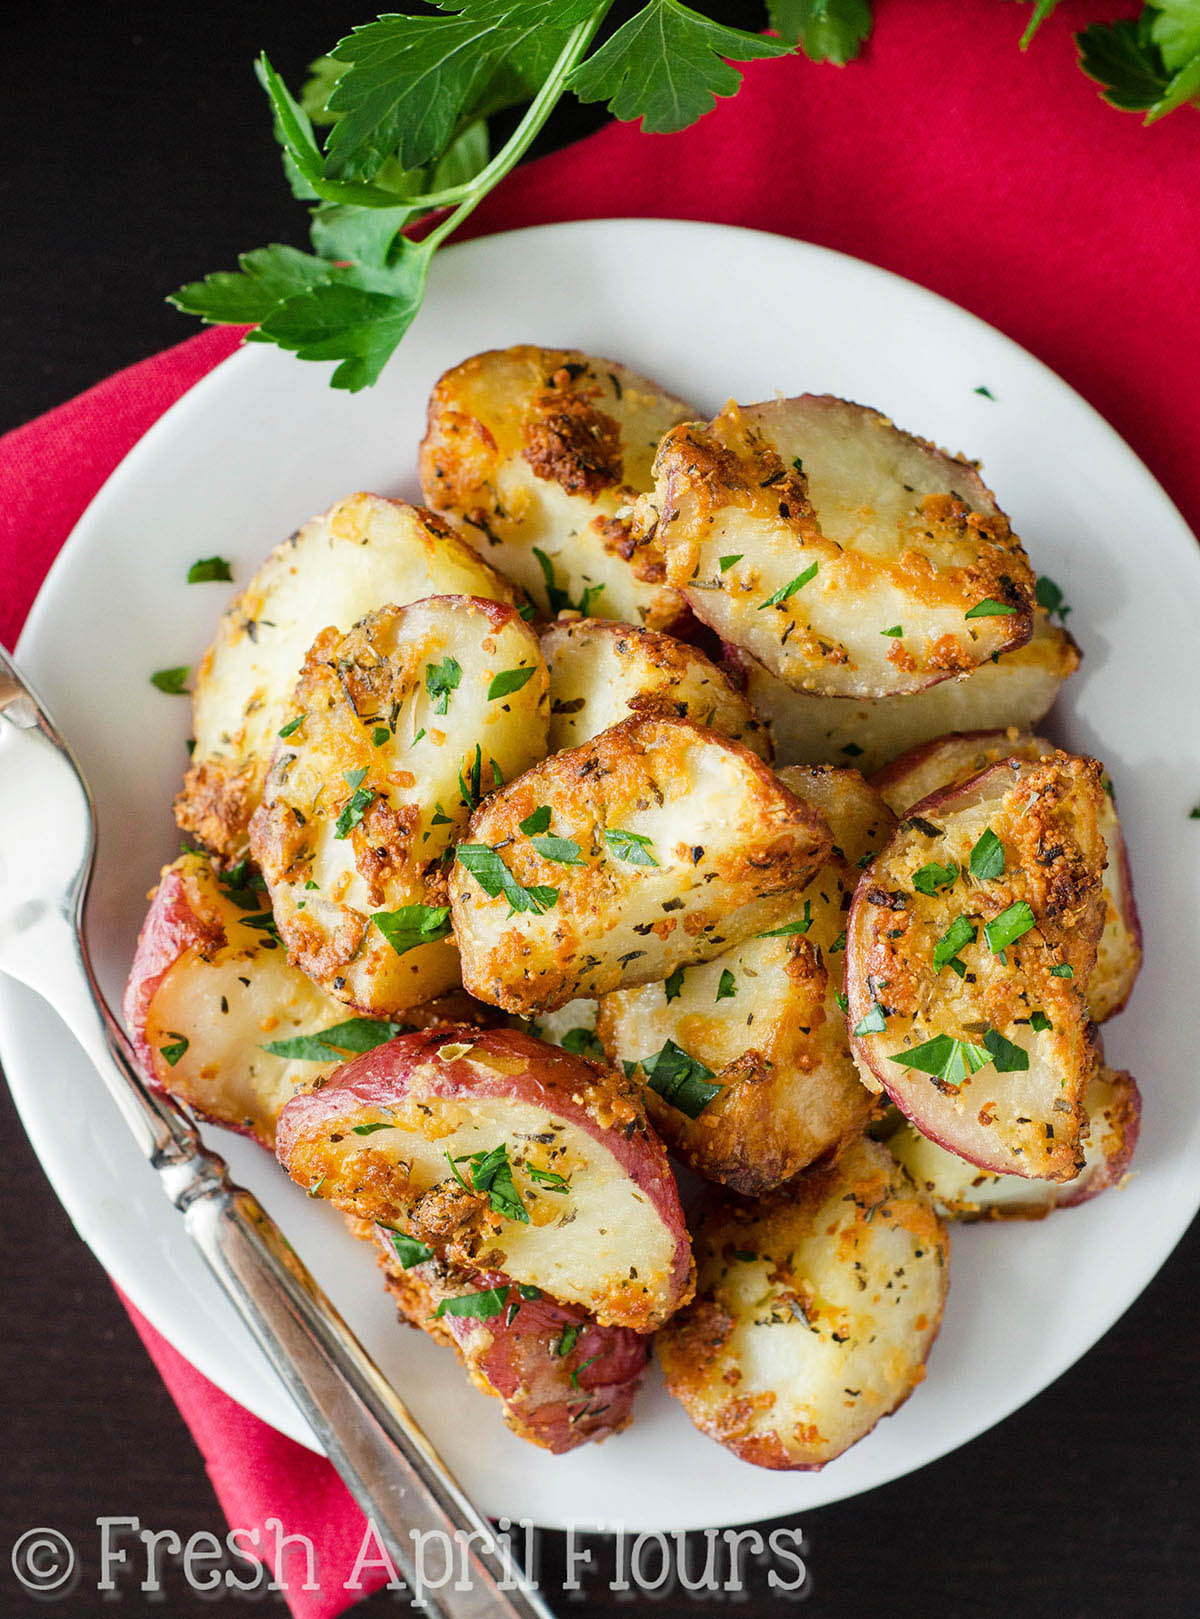 Roasted Herbed Red Potatoes